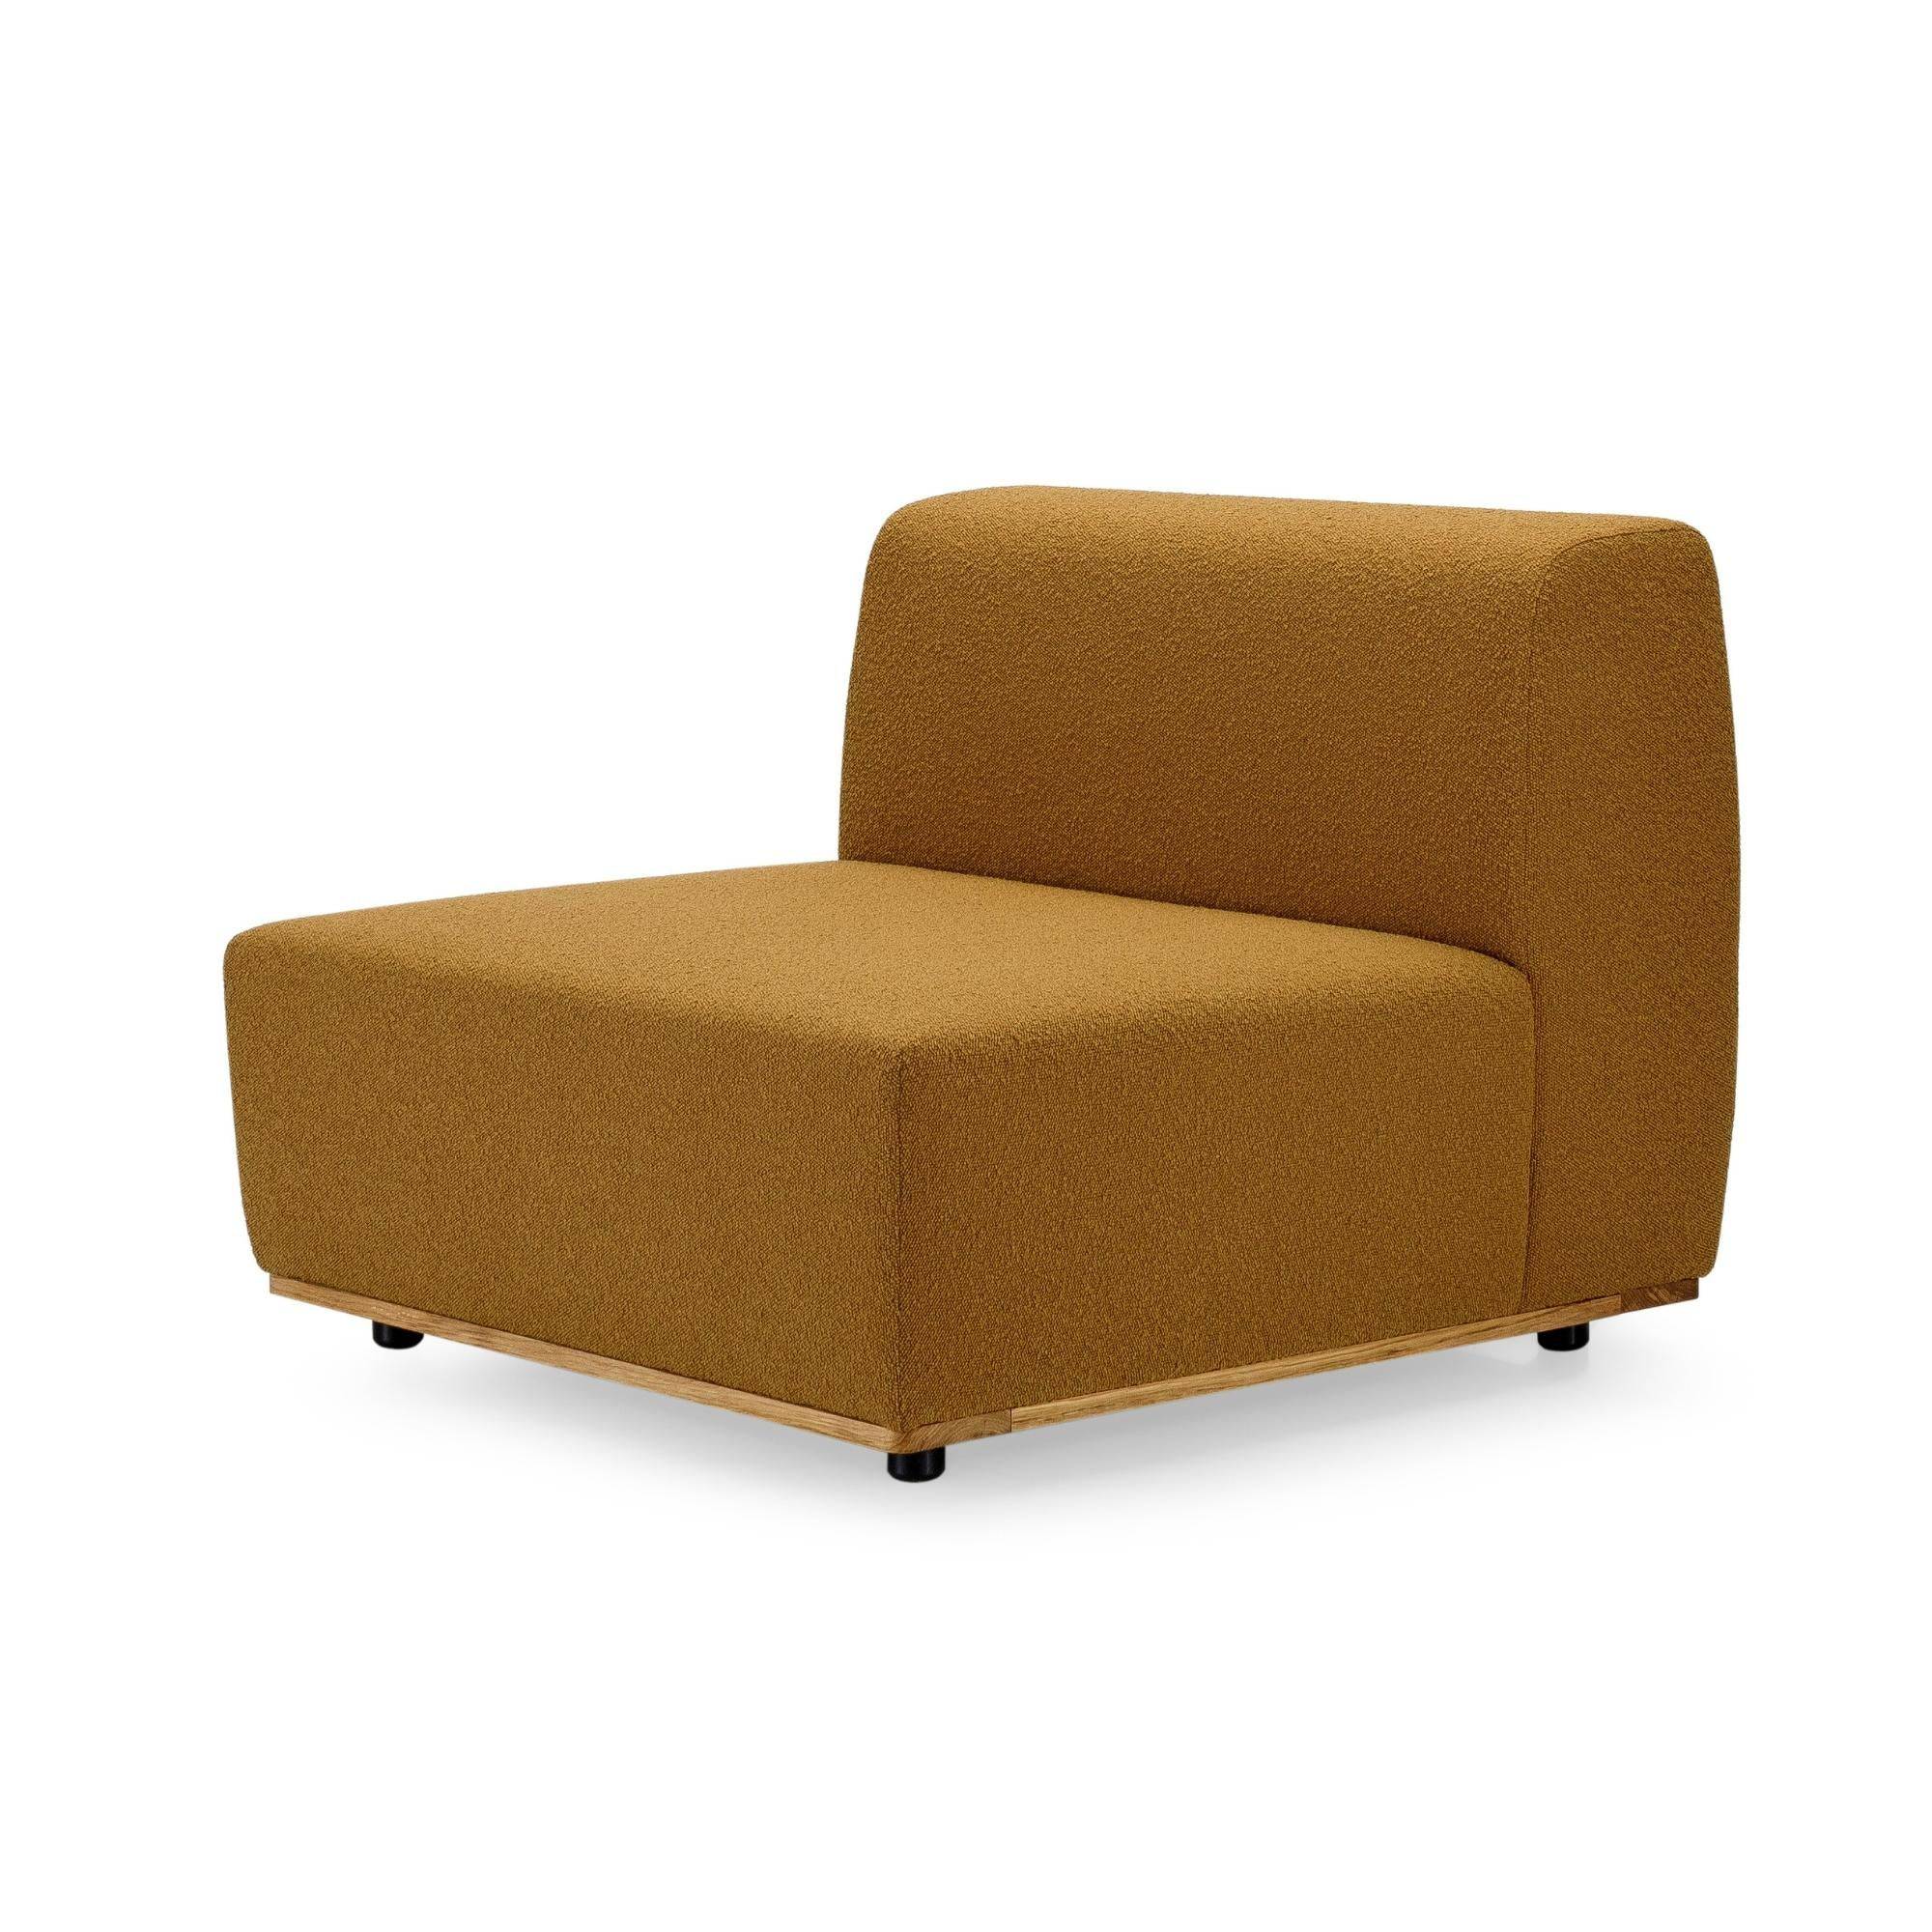 Saler Lounge Chair, Symphony Mills - Mustard - THAT COOL LIVING